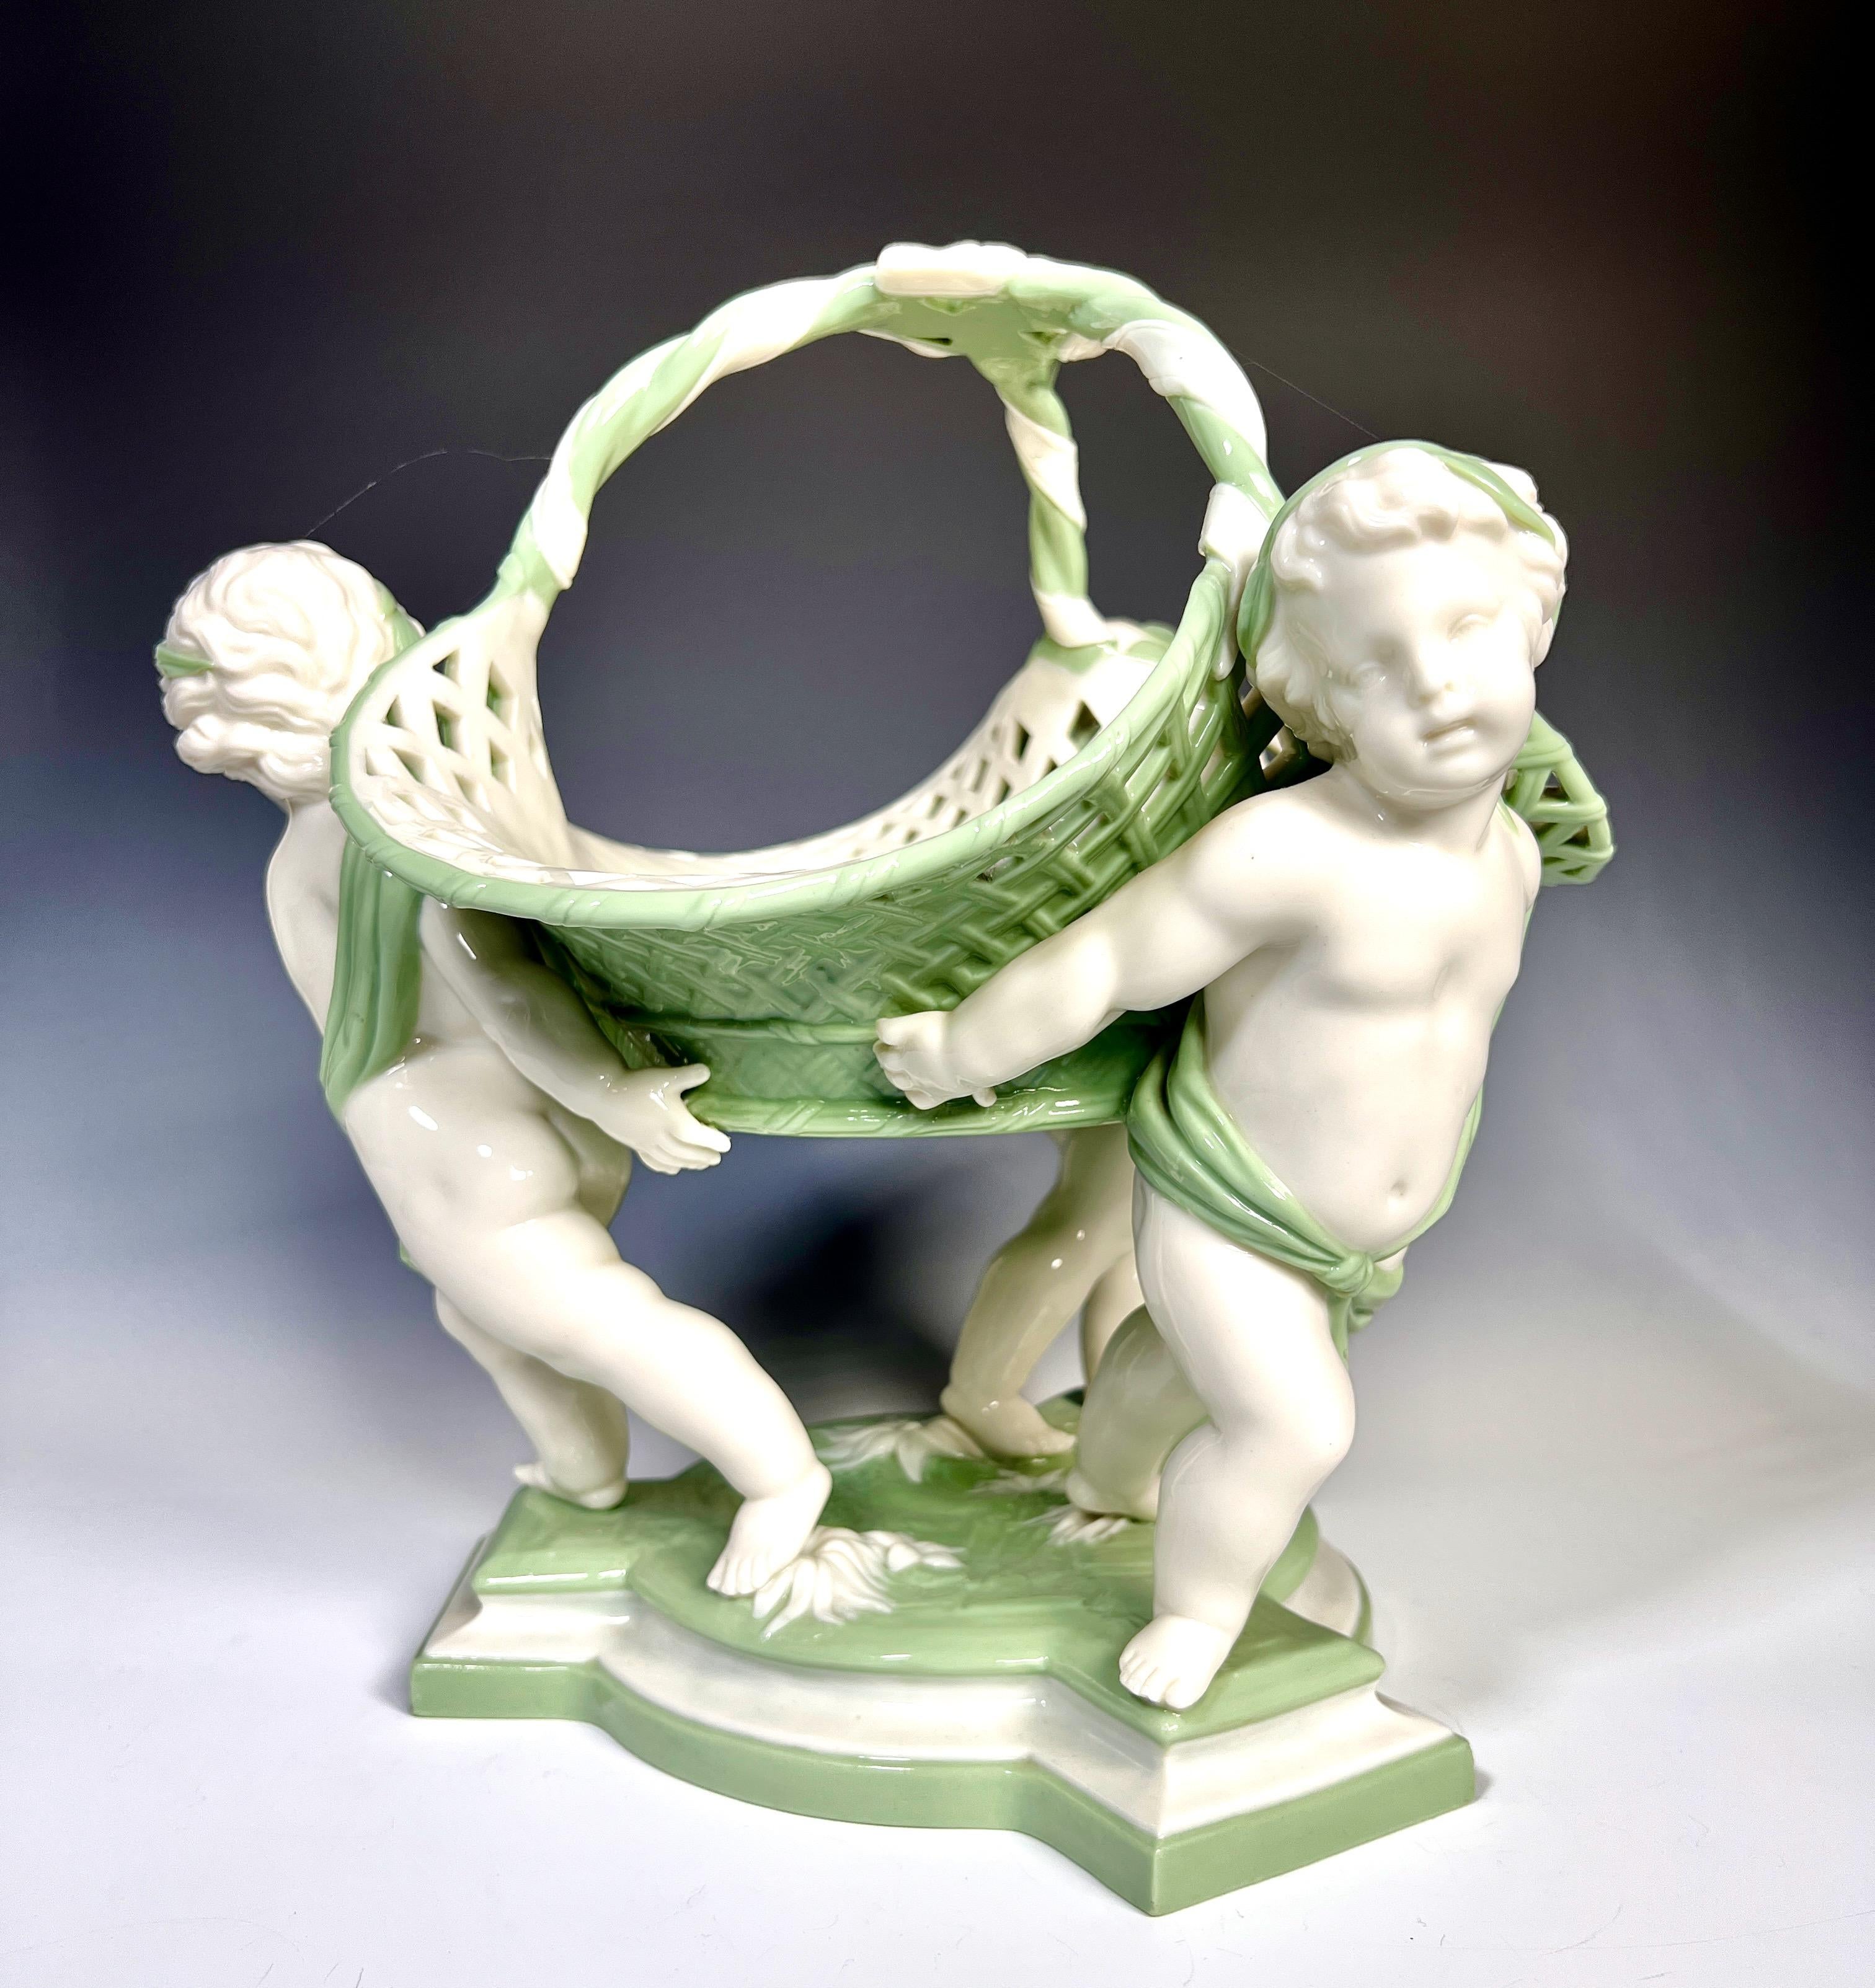 A dramatic and large Minton Centerpiece in the form of a pierced basket upheld by three full sized 